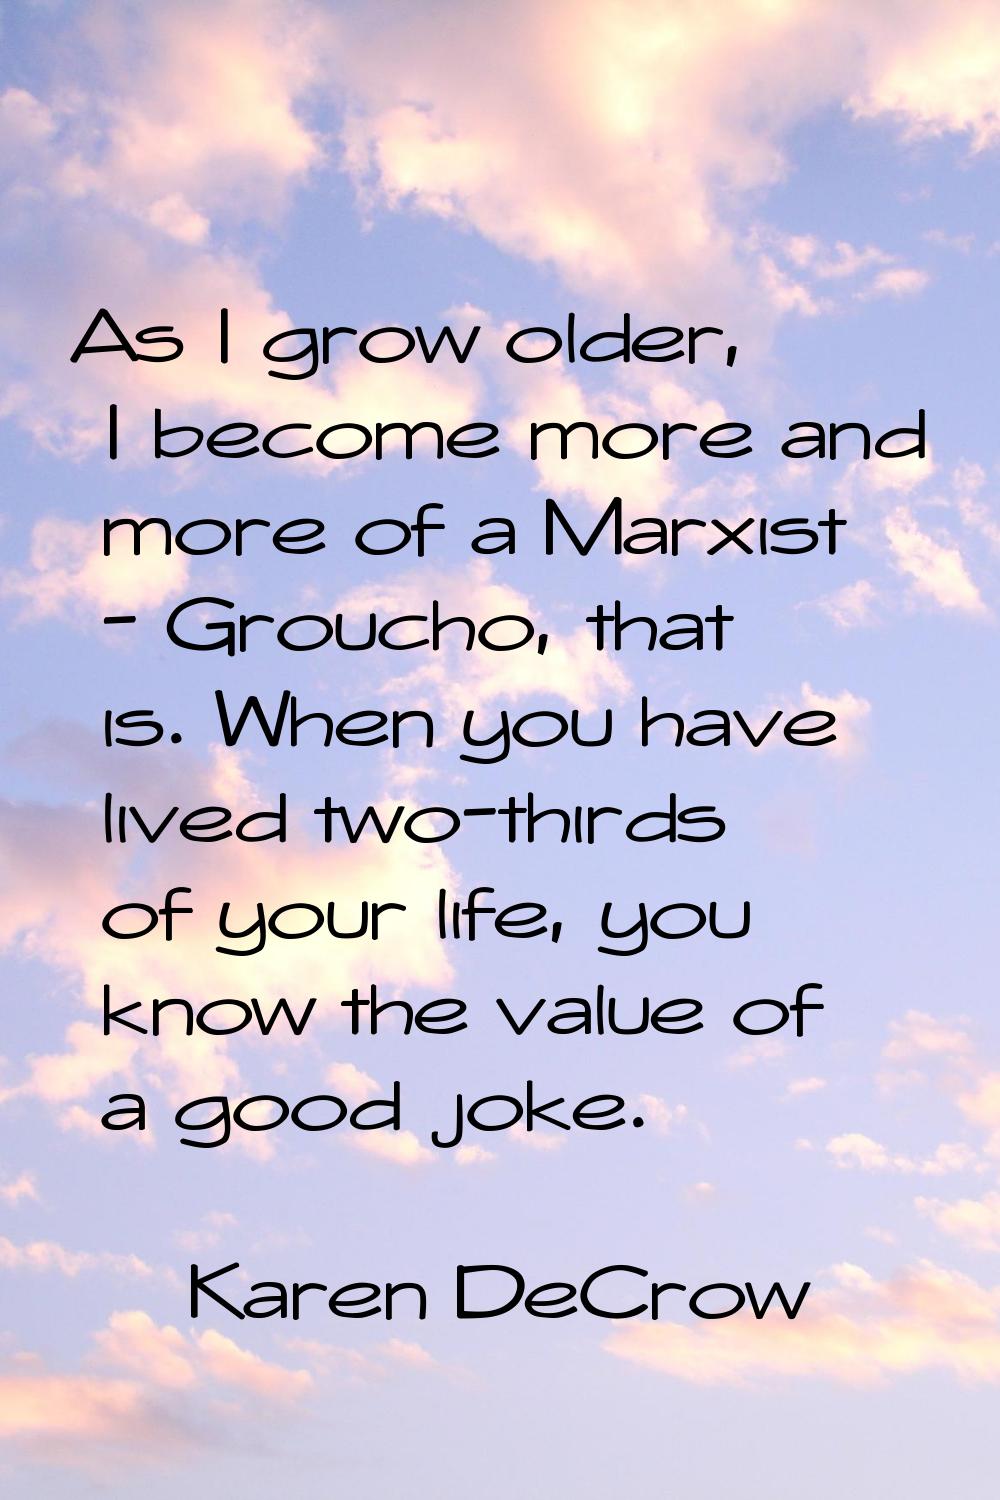 As I grow older, I become more and more of a Marxist - Groucho, that is. When you have lived two-th